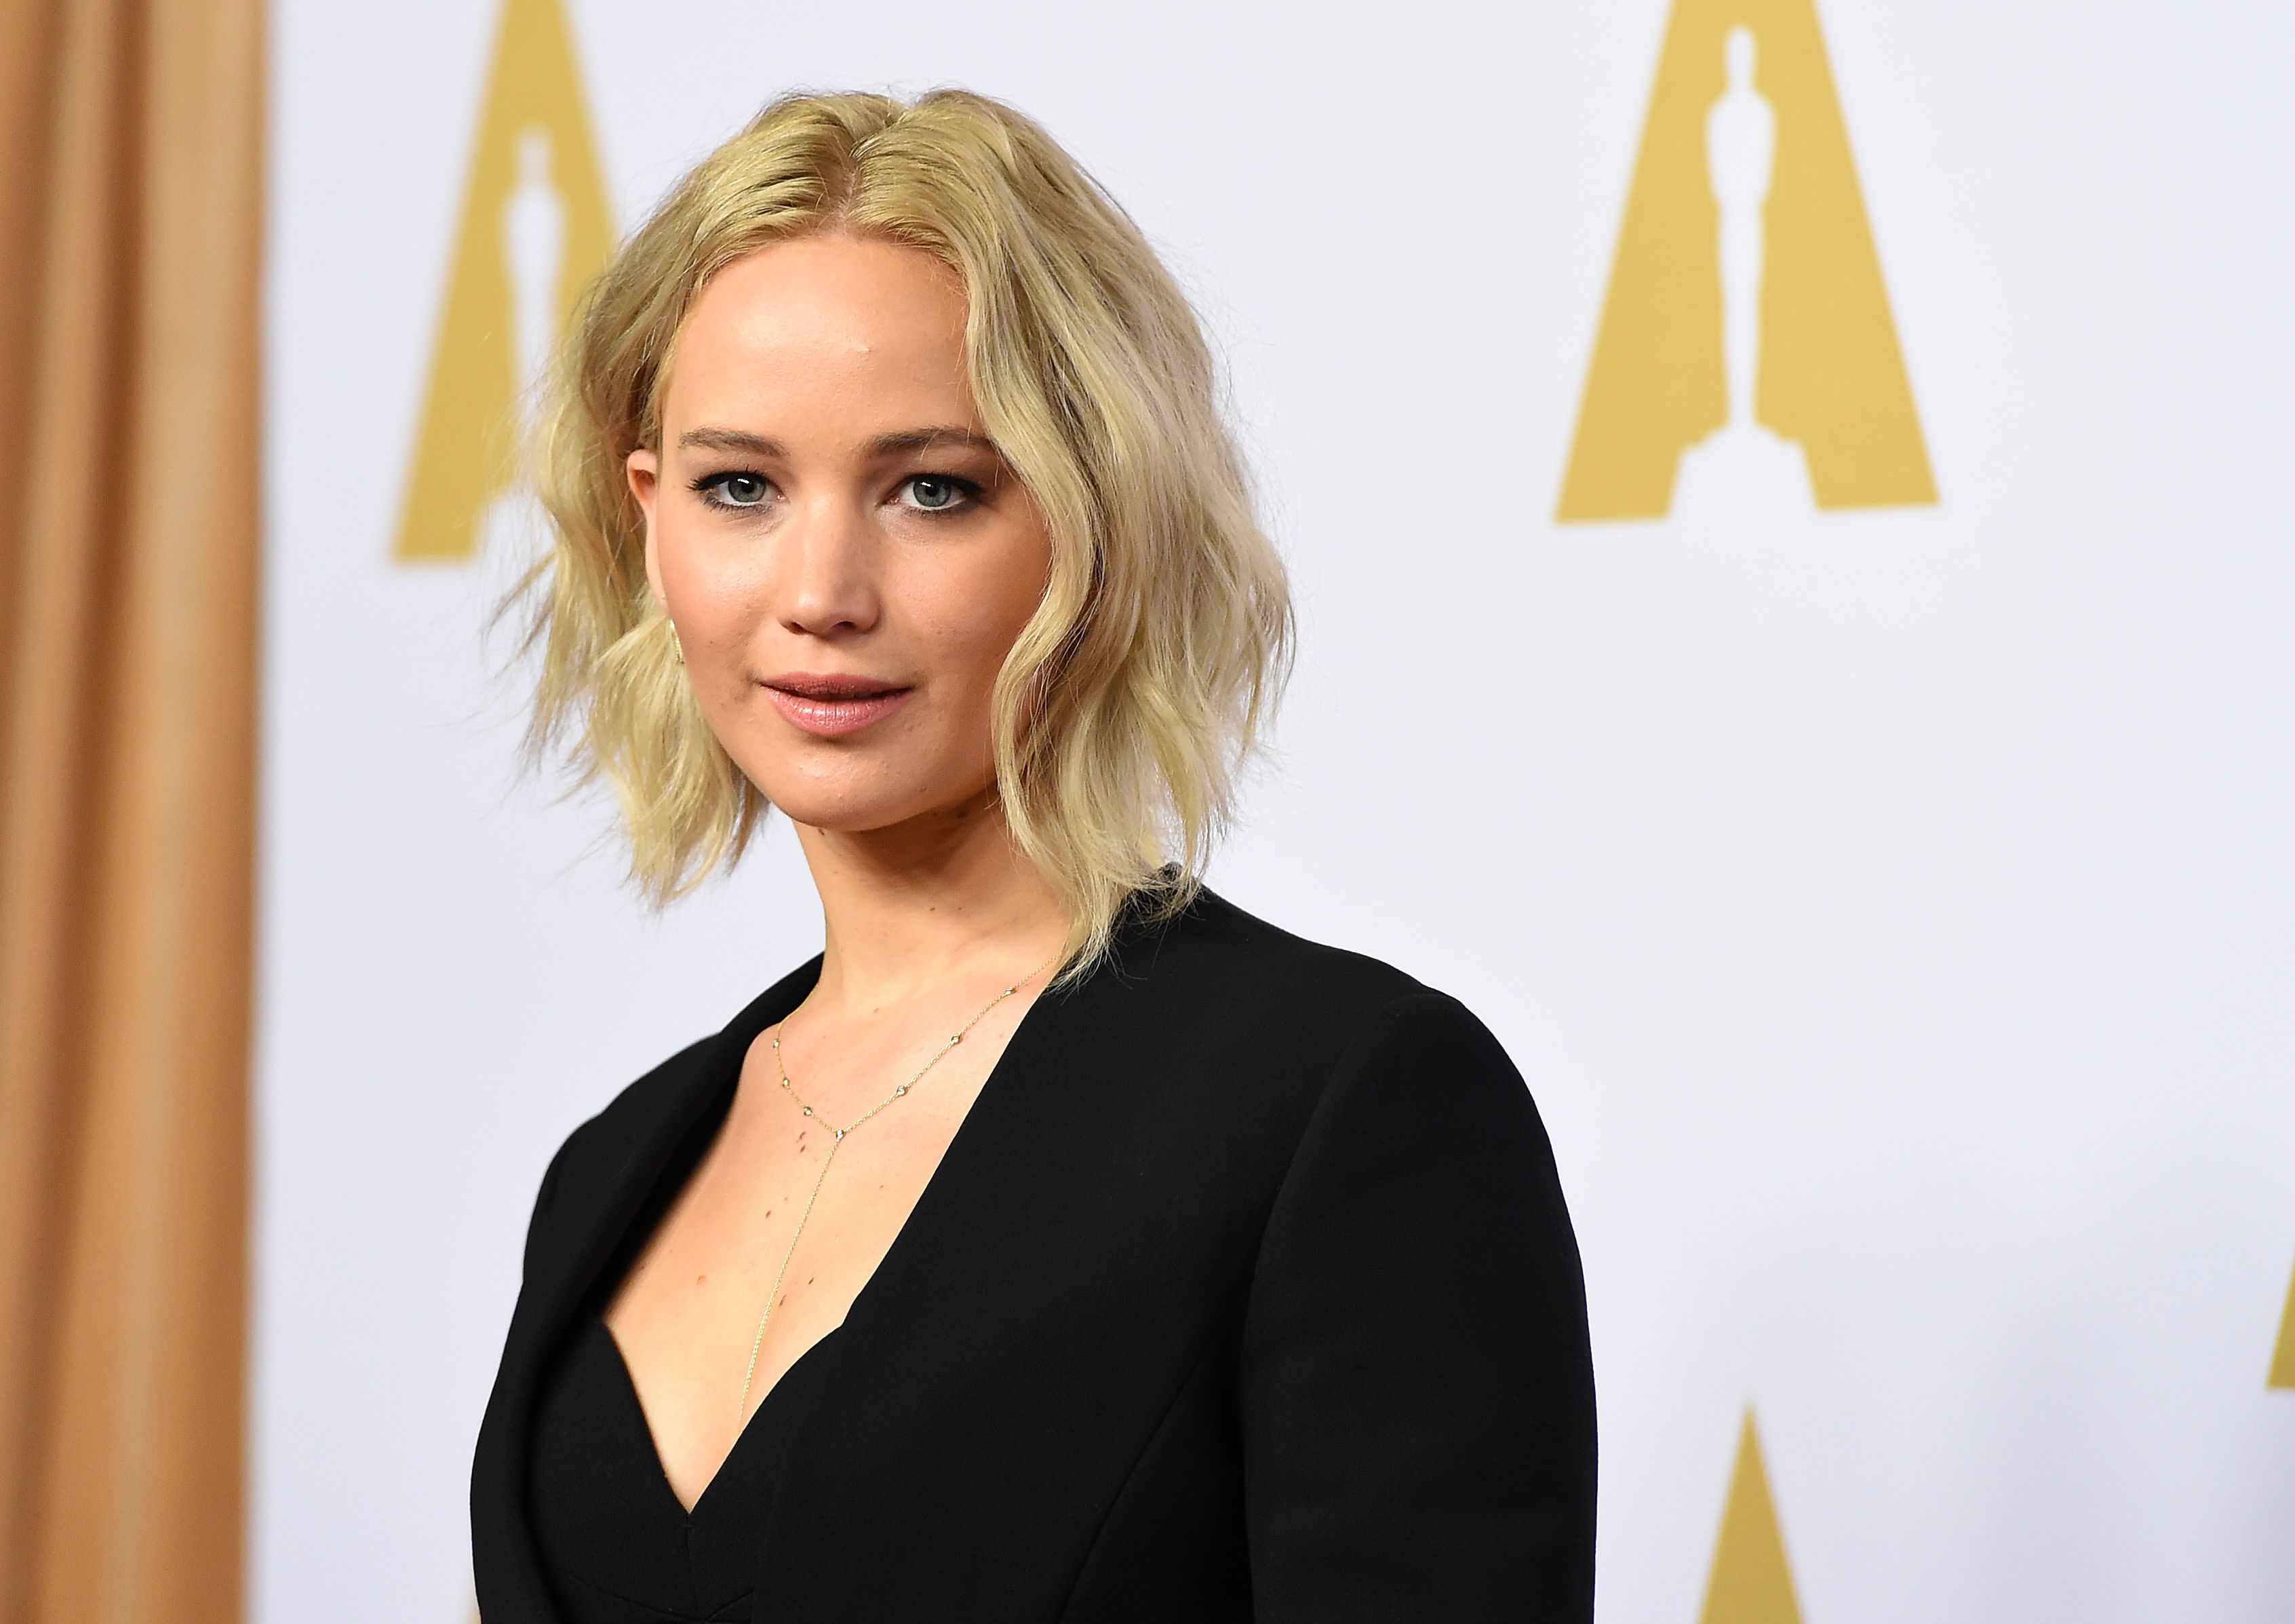 Jennifer Lawrence, nominee for best actress in a leading role, arrives at the 88th Oscar Nominees Luncheon in Beverly Hills, California, February 8, 2016 (Robyn Beck—AFP/Getty Images)